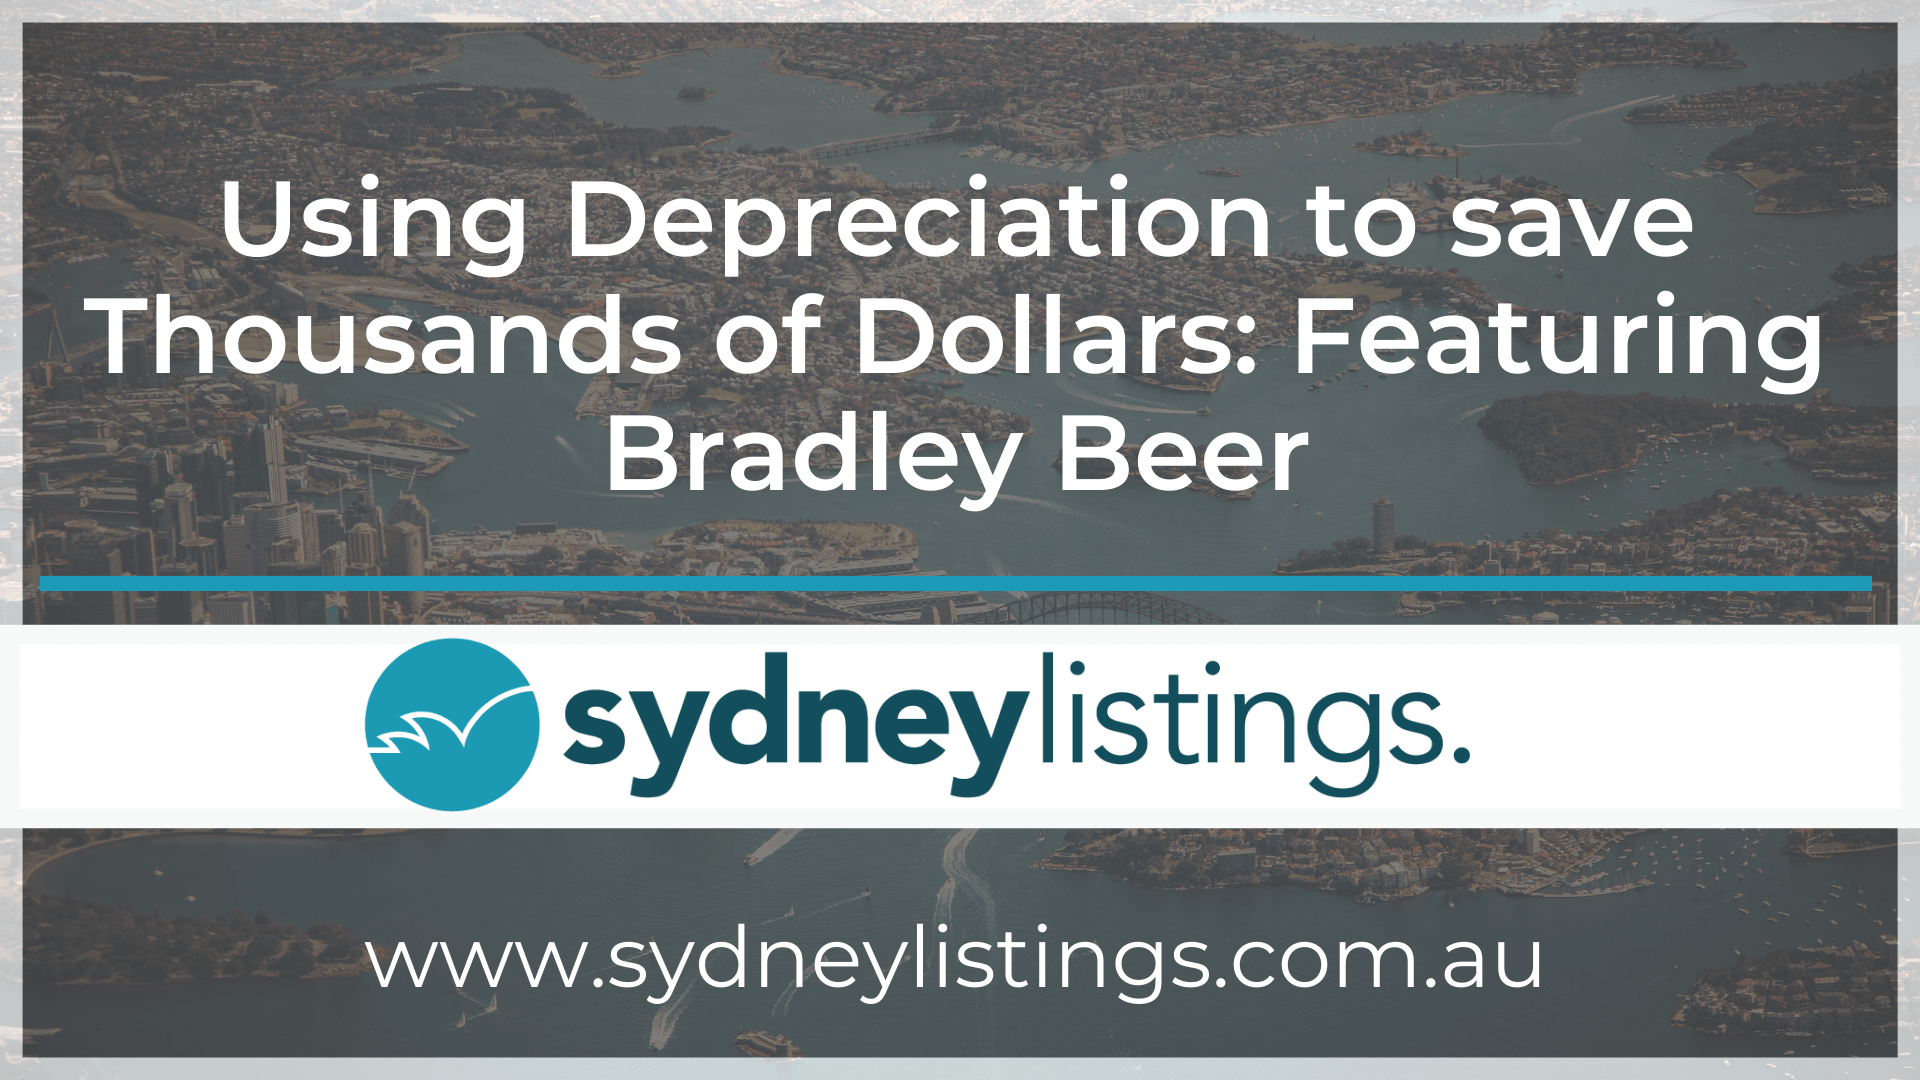 Using Depreciation to save Thousands of Dollars: Featuring Bradley Beer